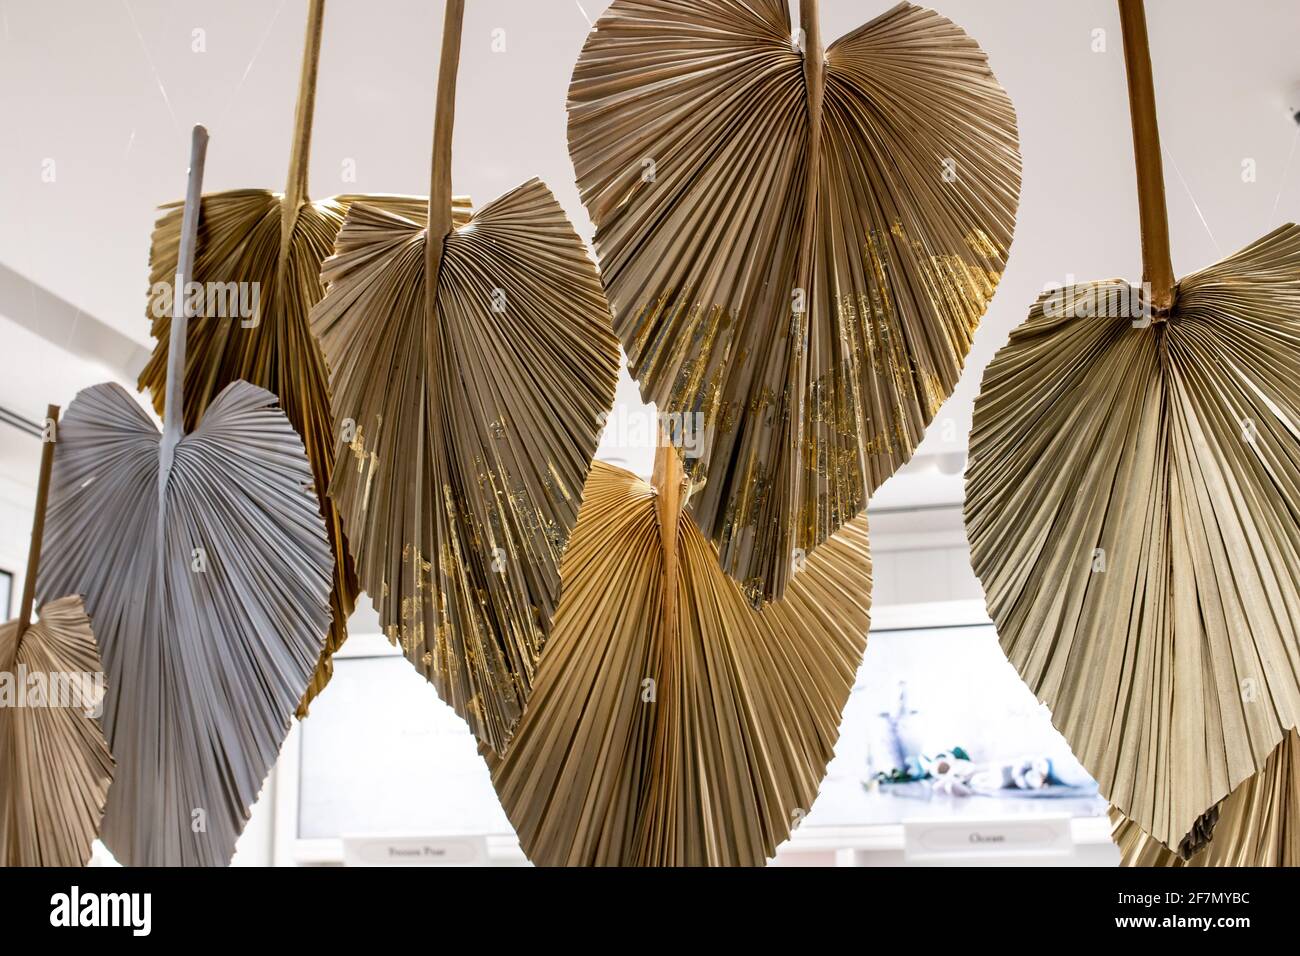 A collection of painted gold palm leaves covered in flaking gold leaf hang down from the ceiling of a boutique in a shopping mall in London, Canada. Stock Photo